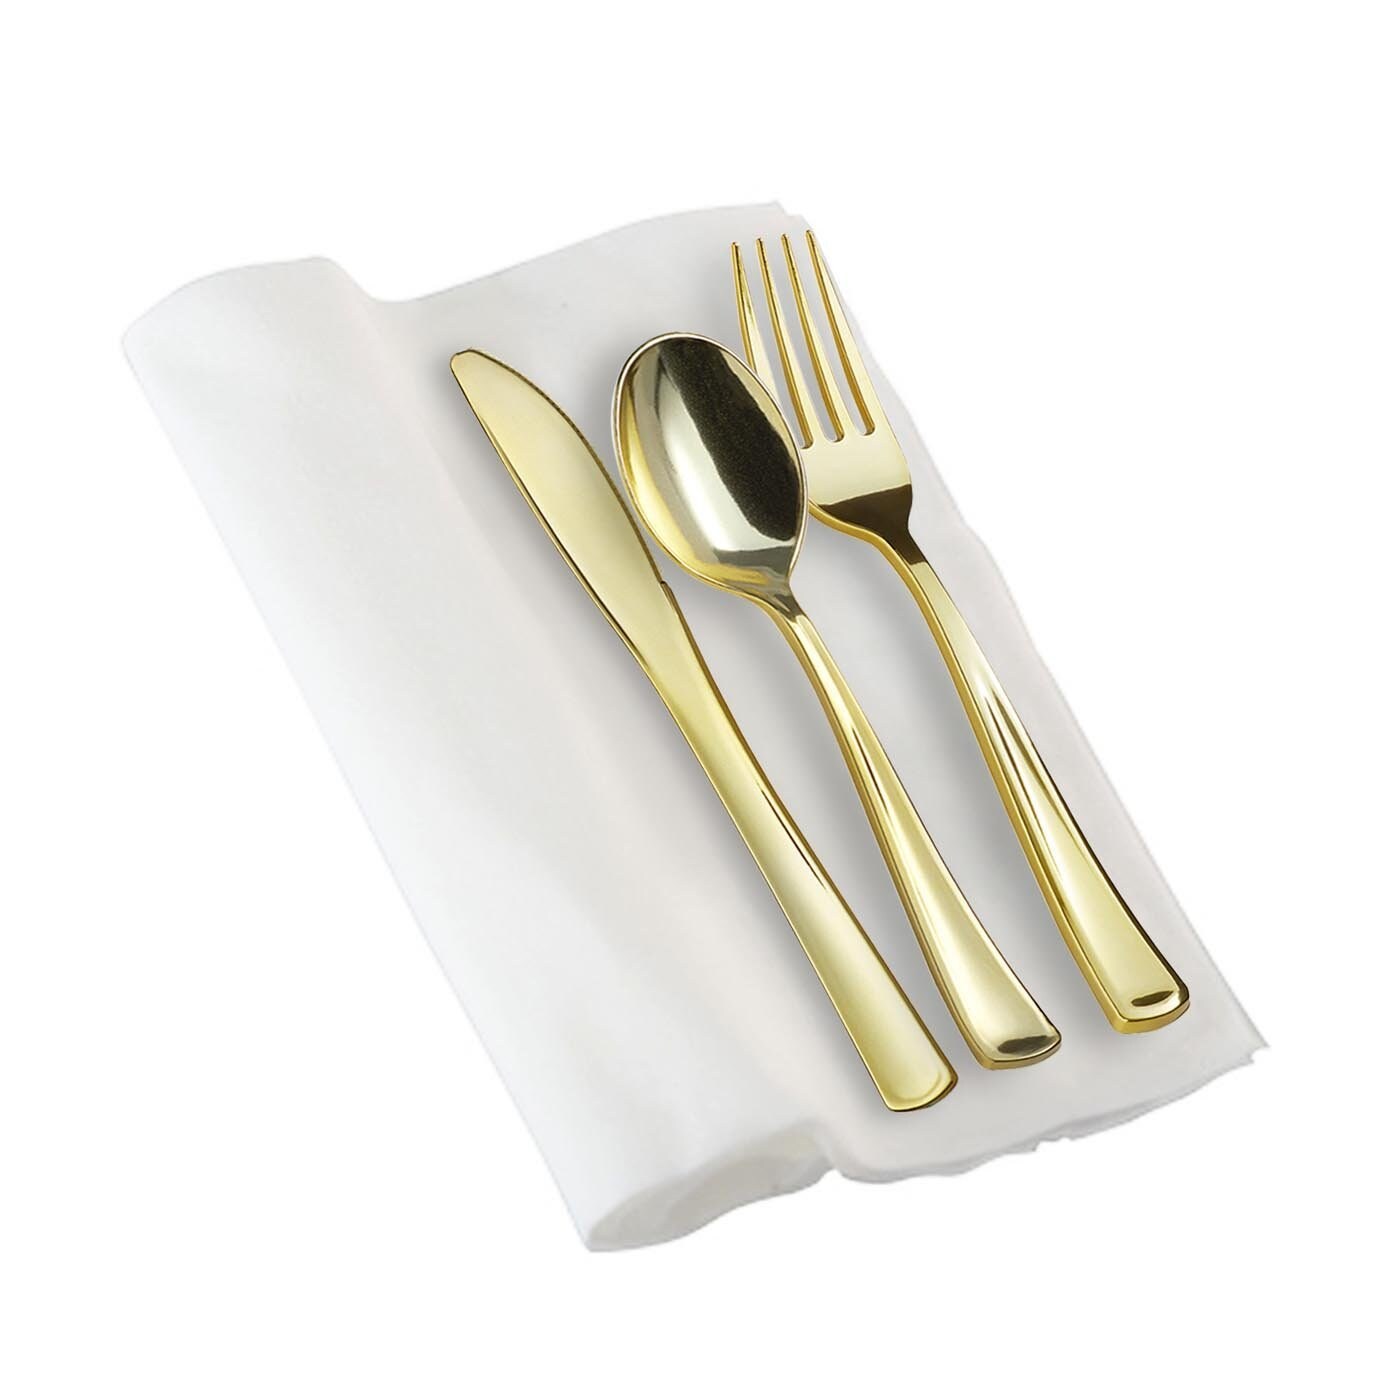 Gold Plastic Cutlery White Napkin Rolls Set (100 Guests)